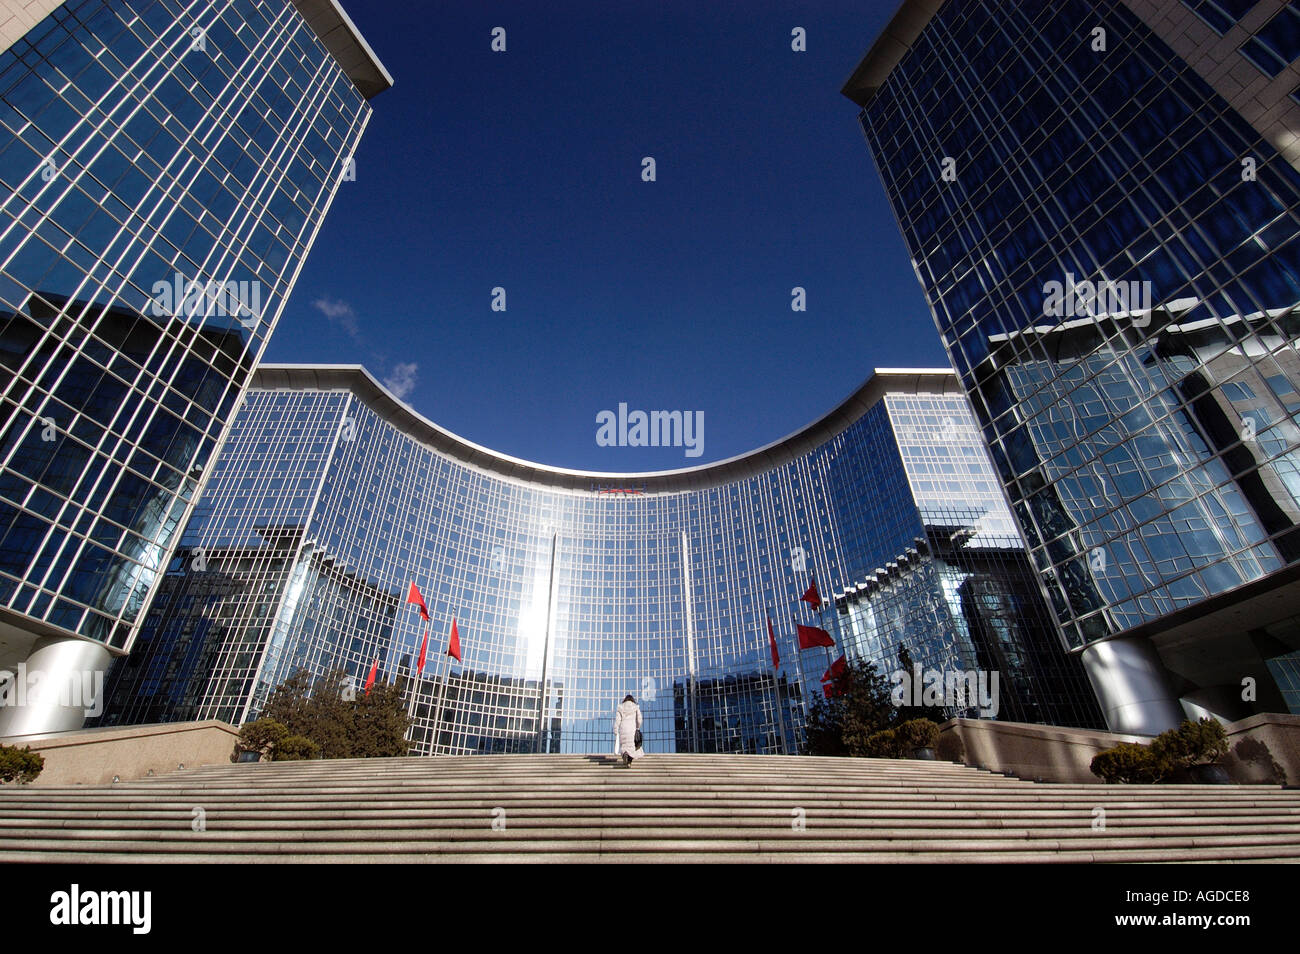 Oriental Plaza shopping malls offices and grand Hyatt Hotel  in Wangfujing central Beijing China Stock Photo